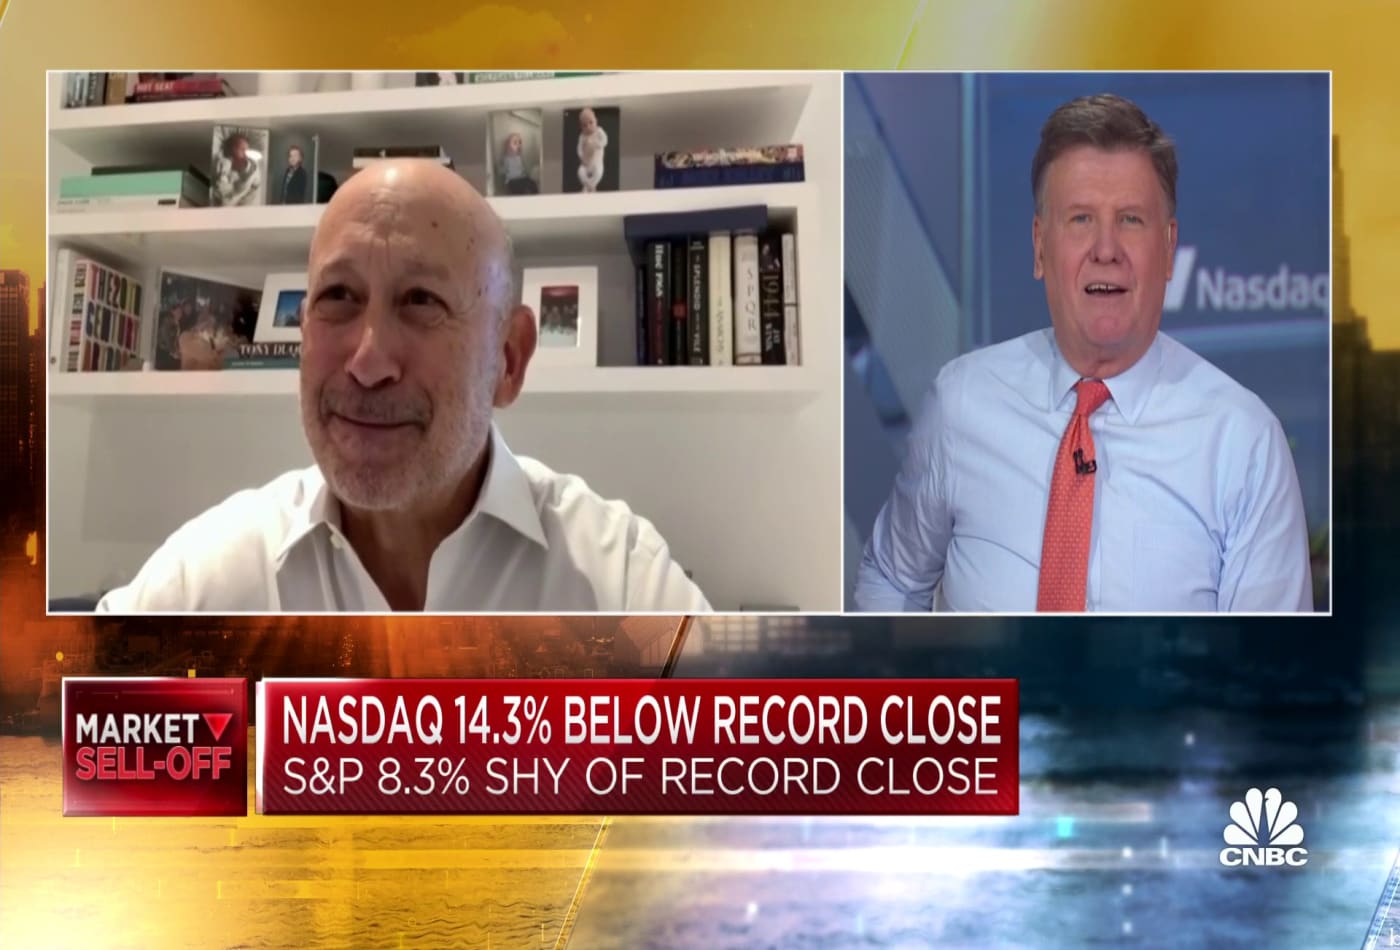 Crypto is happening, I would want an oar in that water: Fmr. Goldman Sachs CEO Blankfein